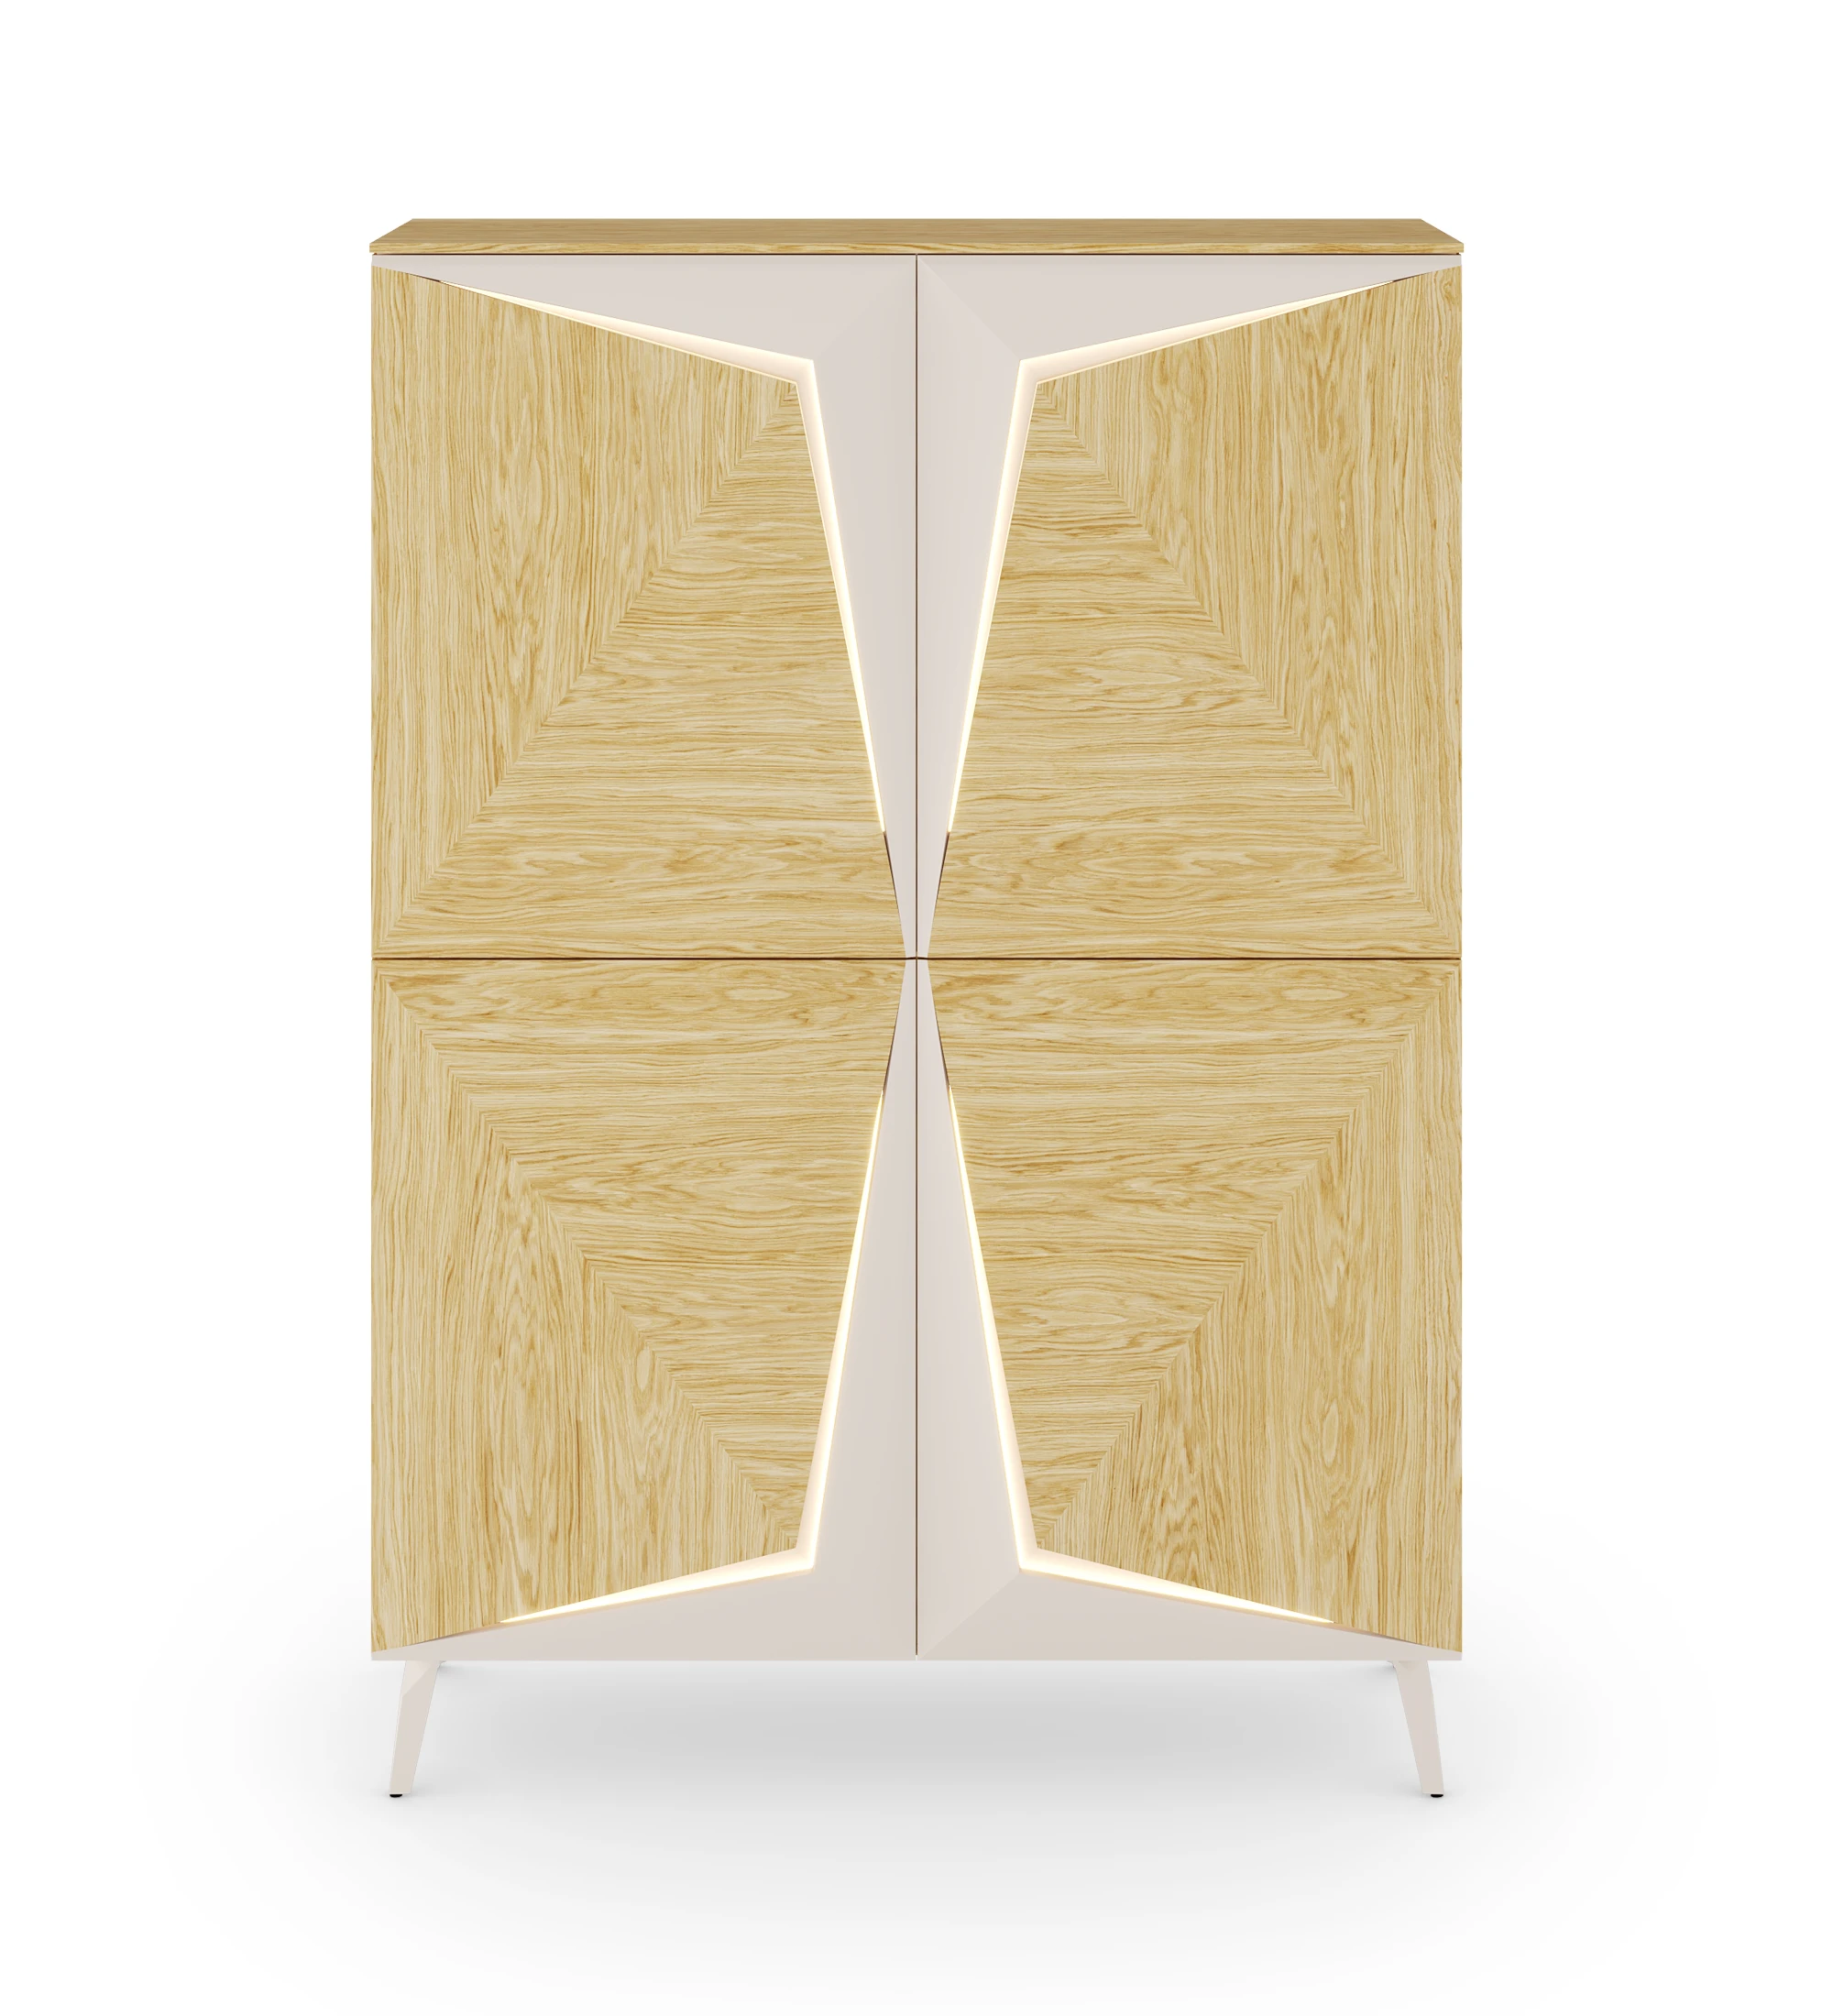 Vajillero with lighting, 4 doors in natural oak with pearl details, with natural oak structure and metal foot lacquered in pearl.